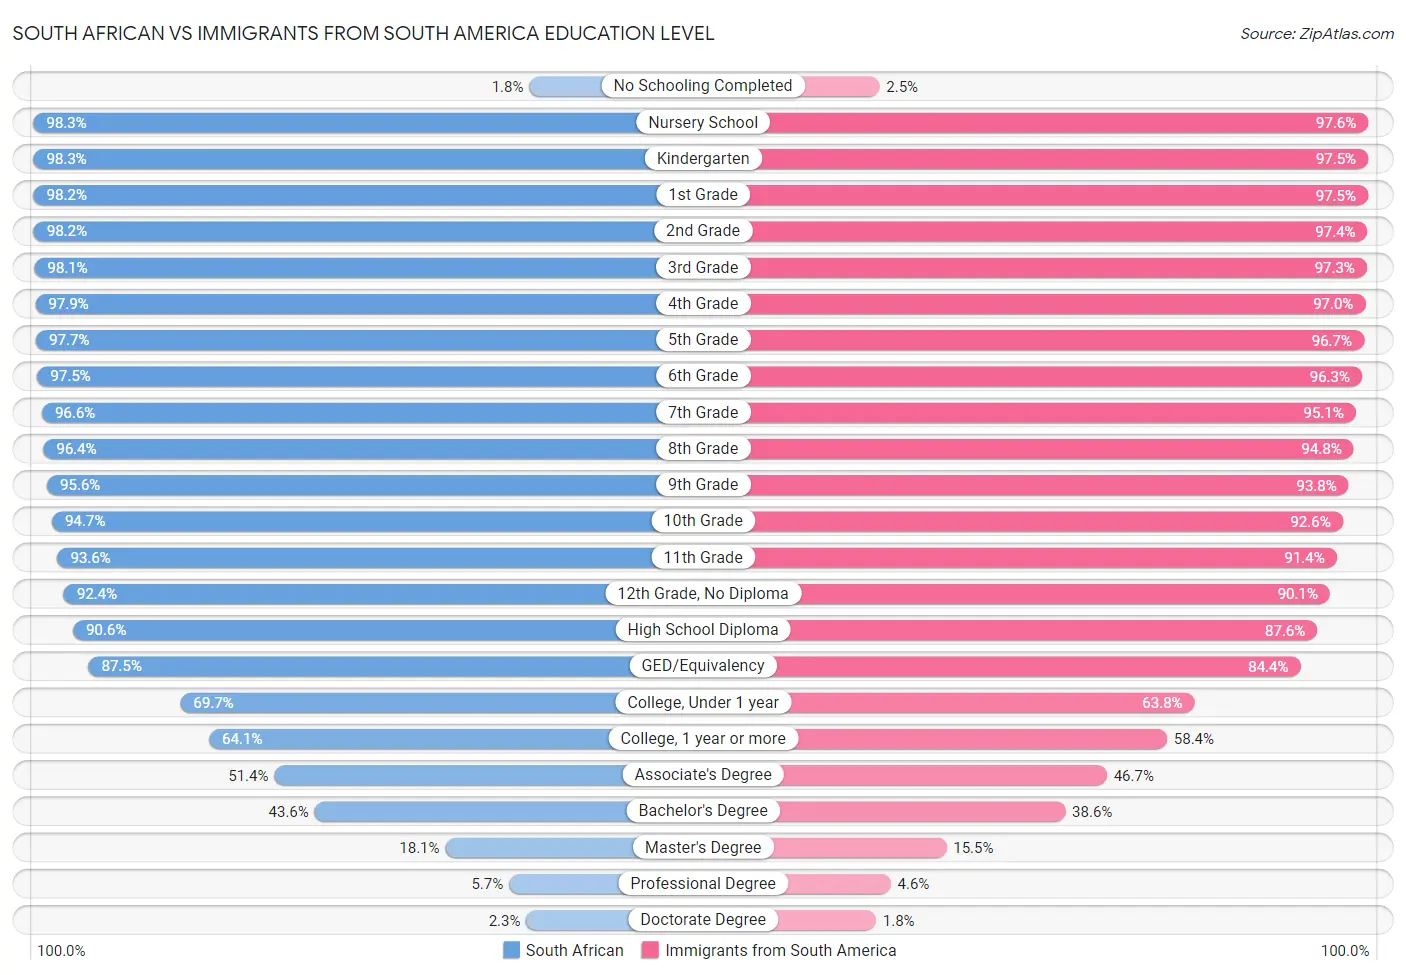 South African vs Immigrants from South America Education Level